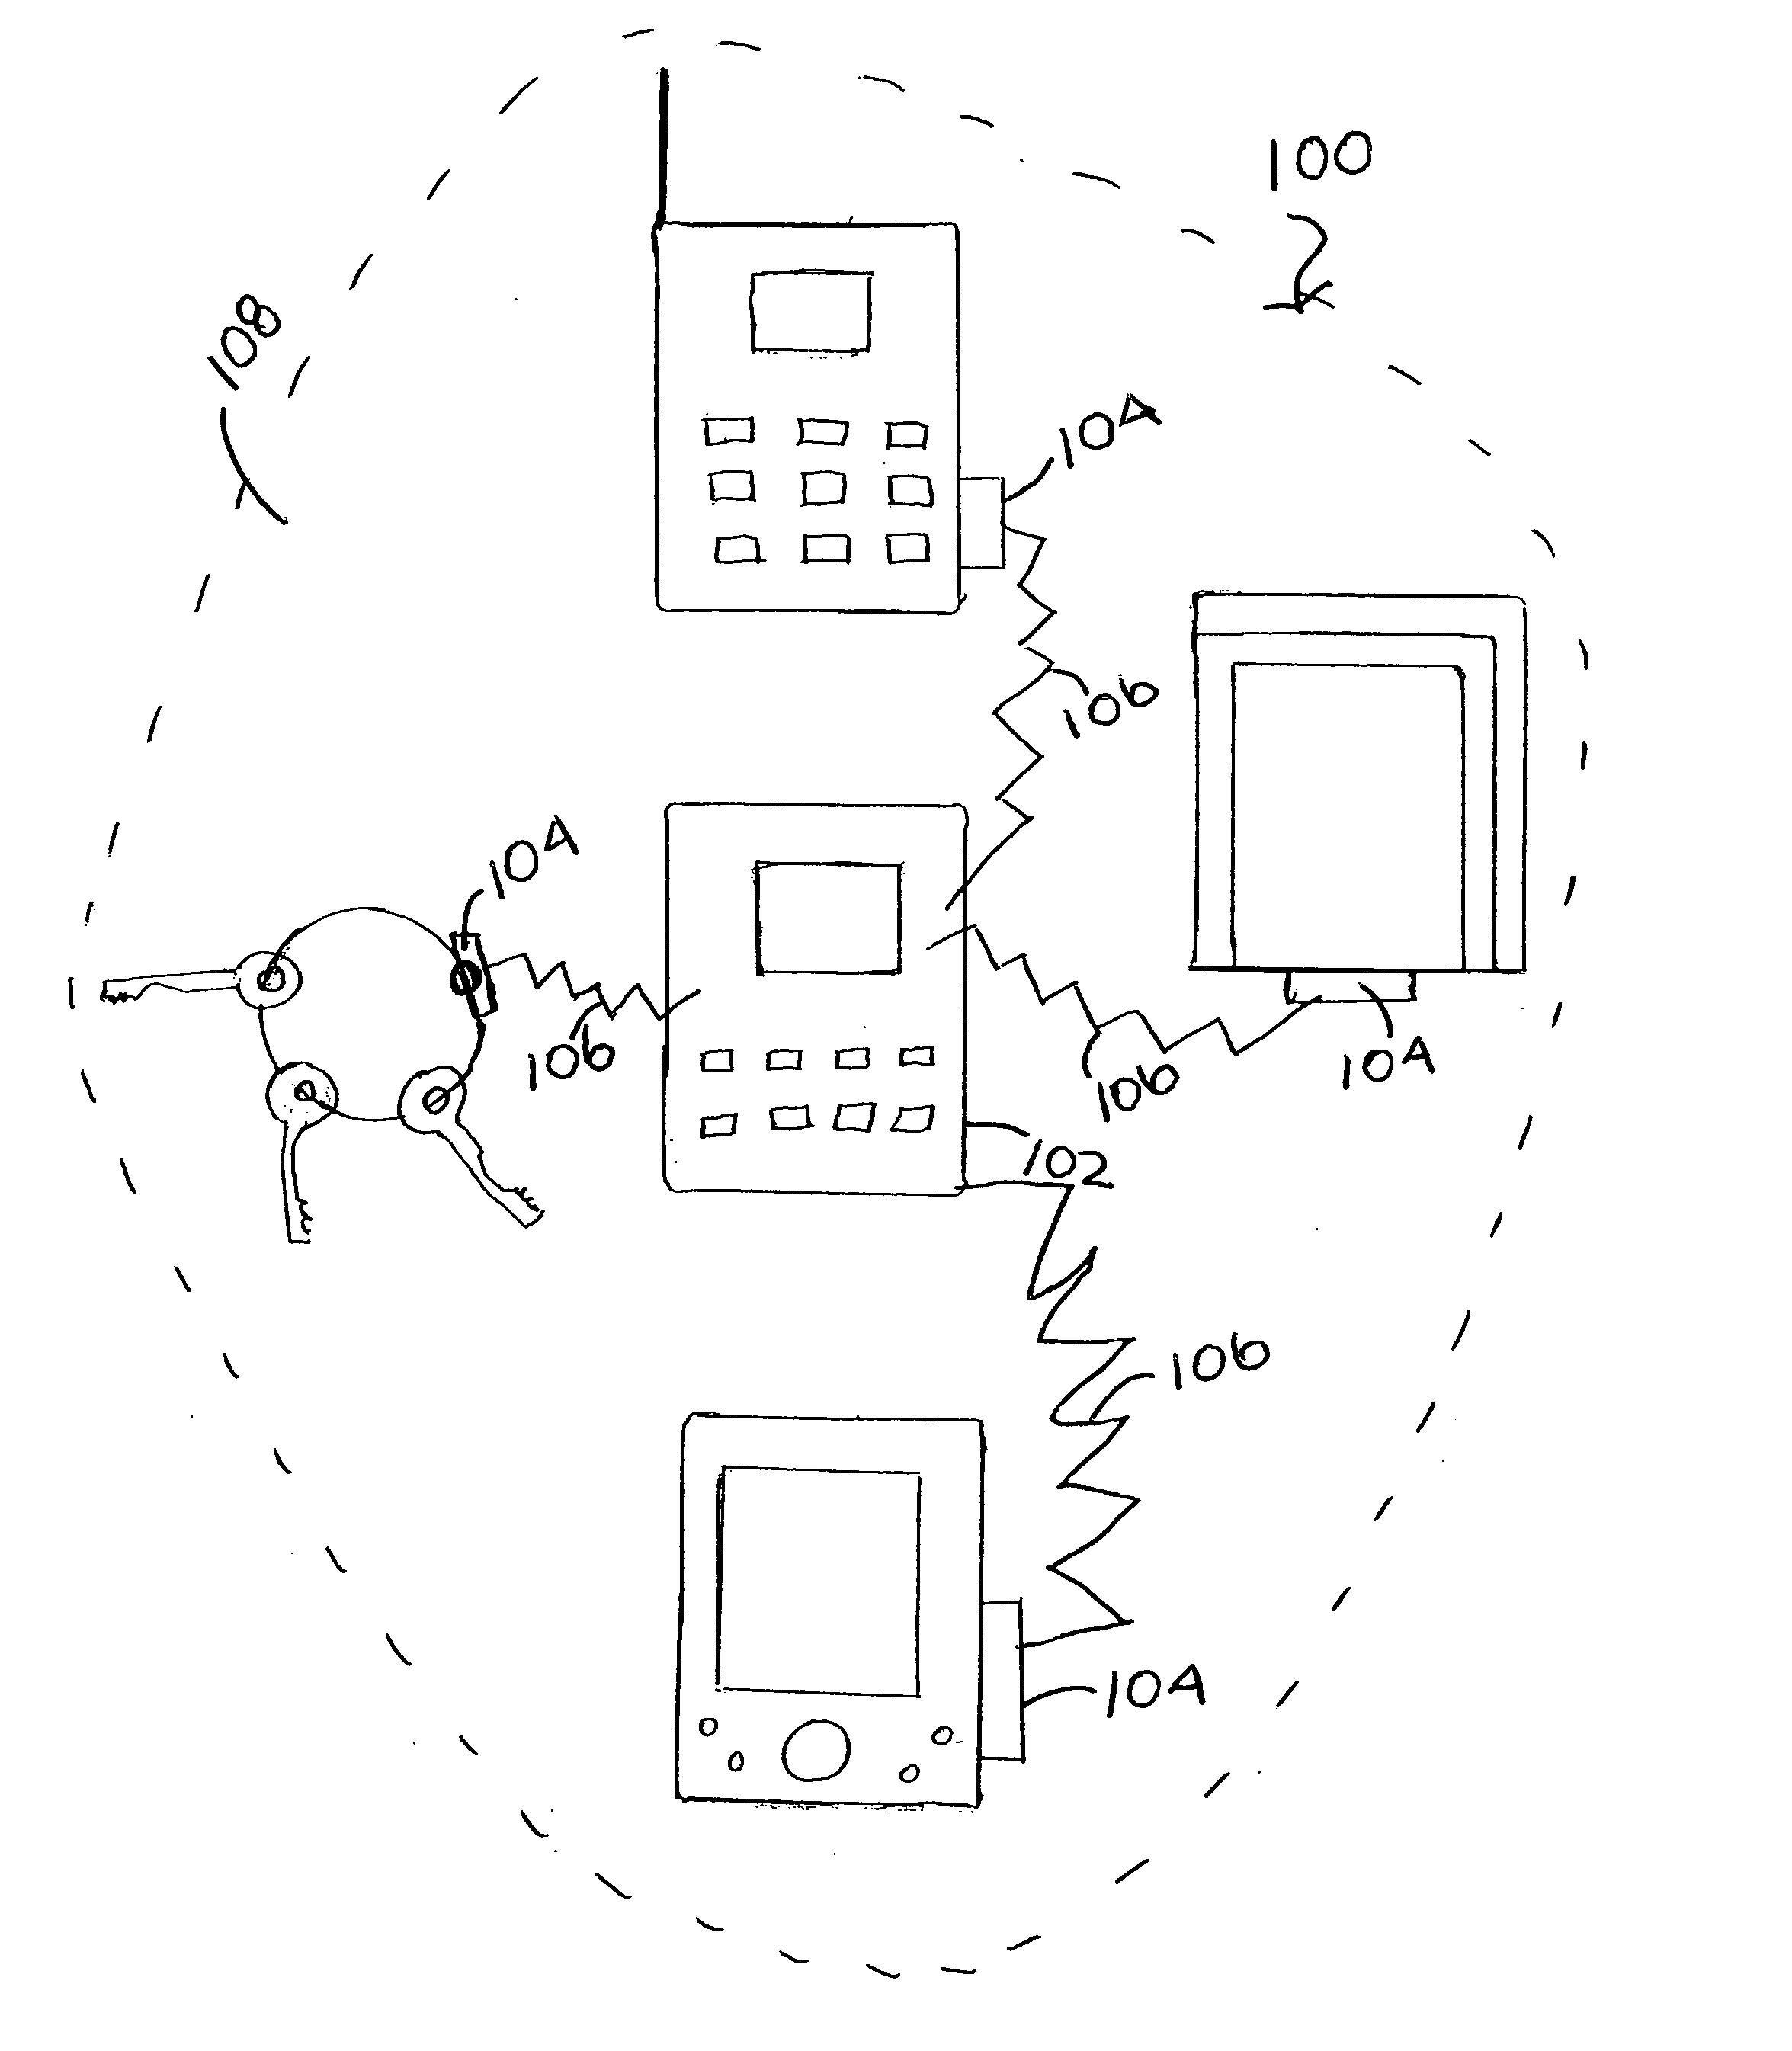 System and method for preventing loss of personal items